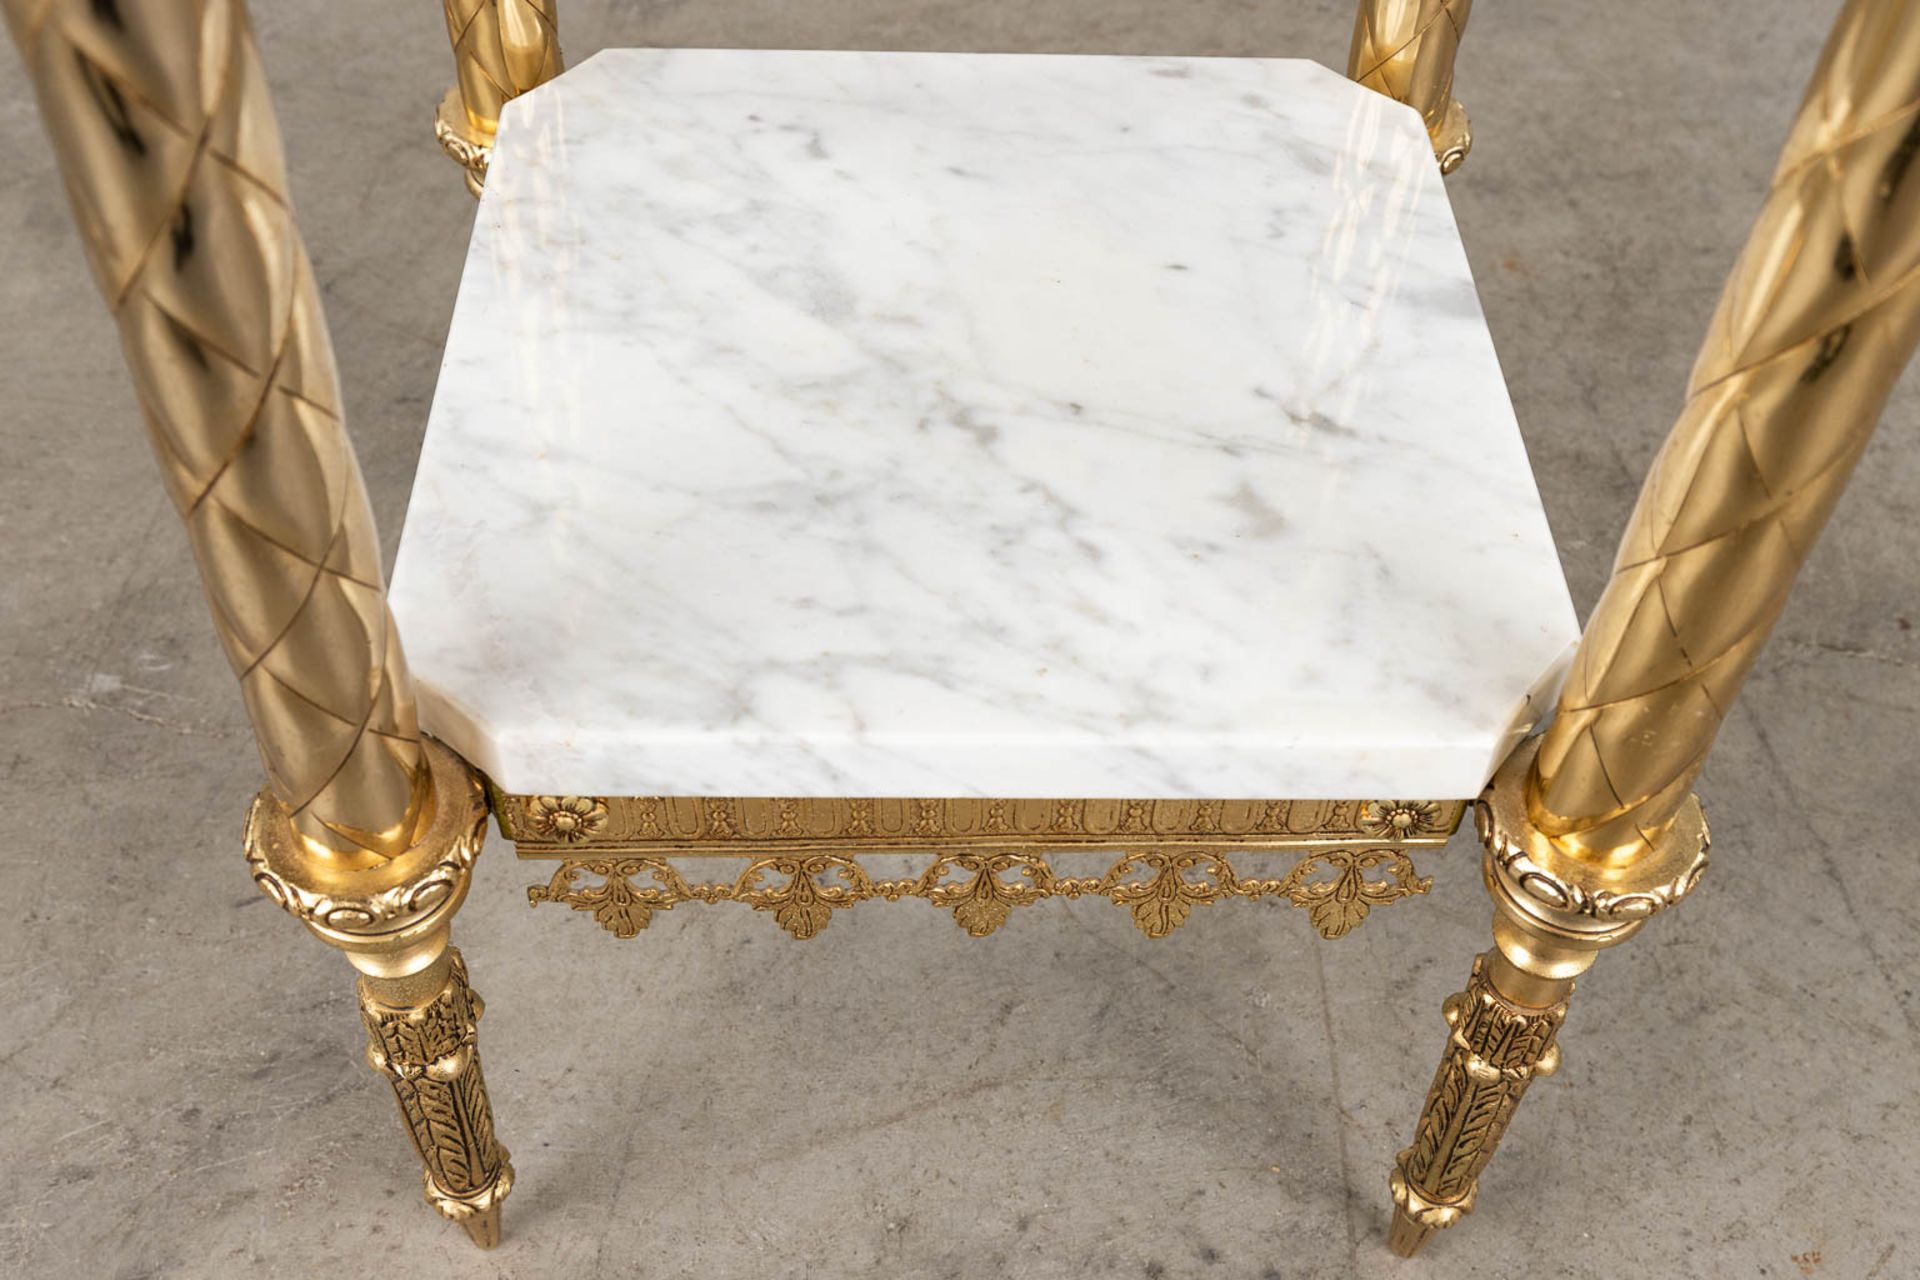 A pedestal, brass and white marble. 20th C. (L: 34 x W: 34 x H: 72 cm) - Image 9 of 11